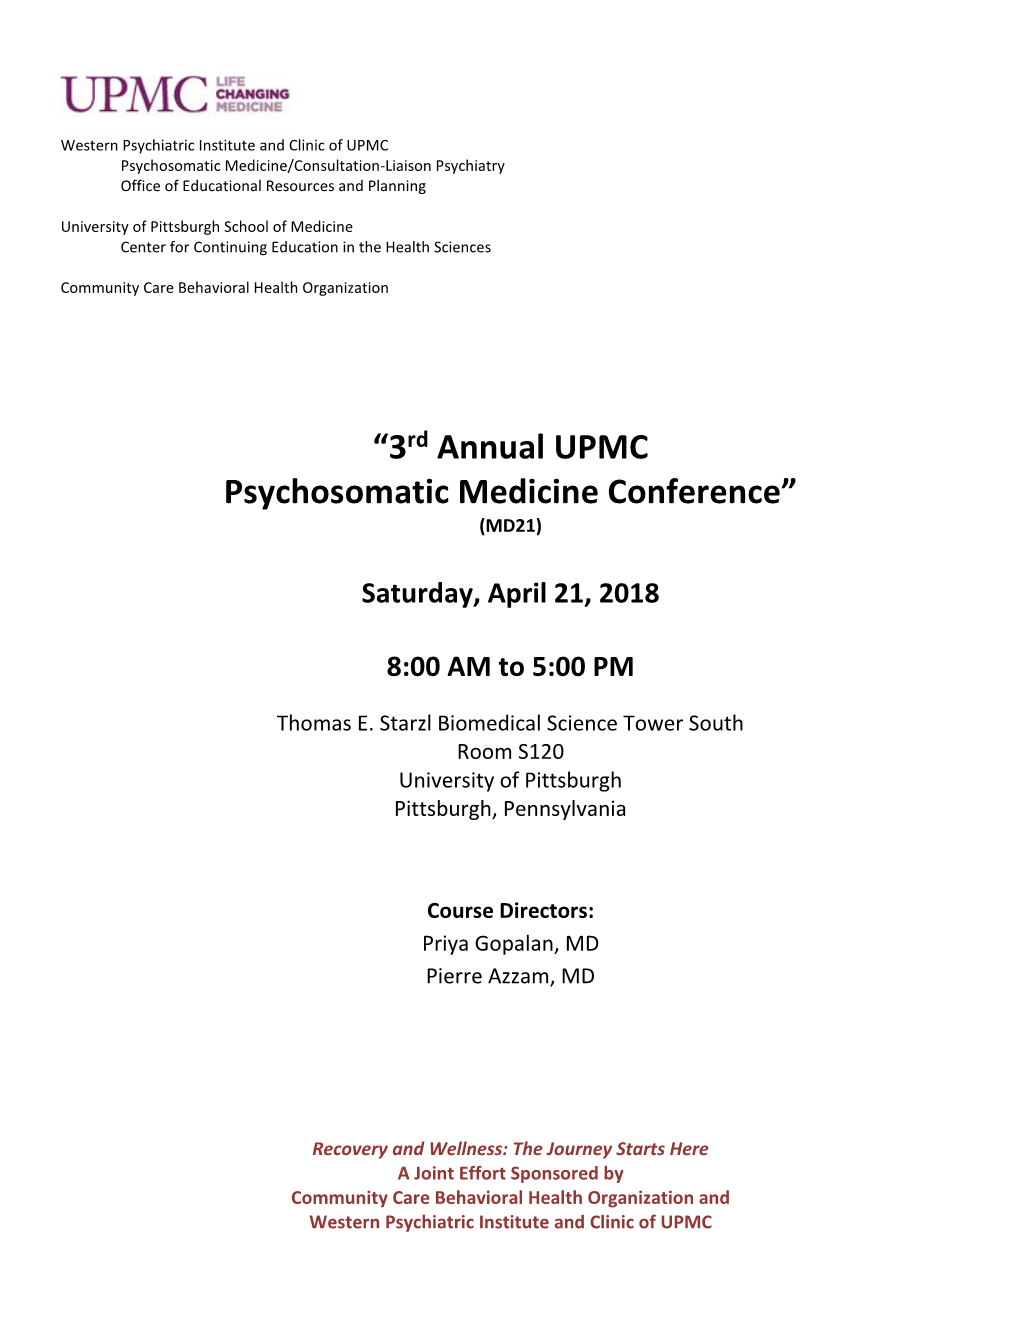 “3Rd Annual UPMC Psychosomatic Medicine Conference” (MD21)